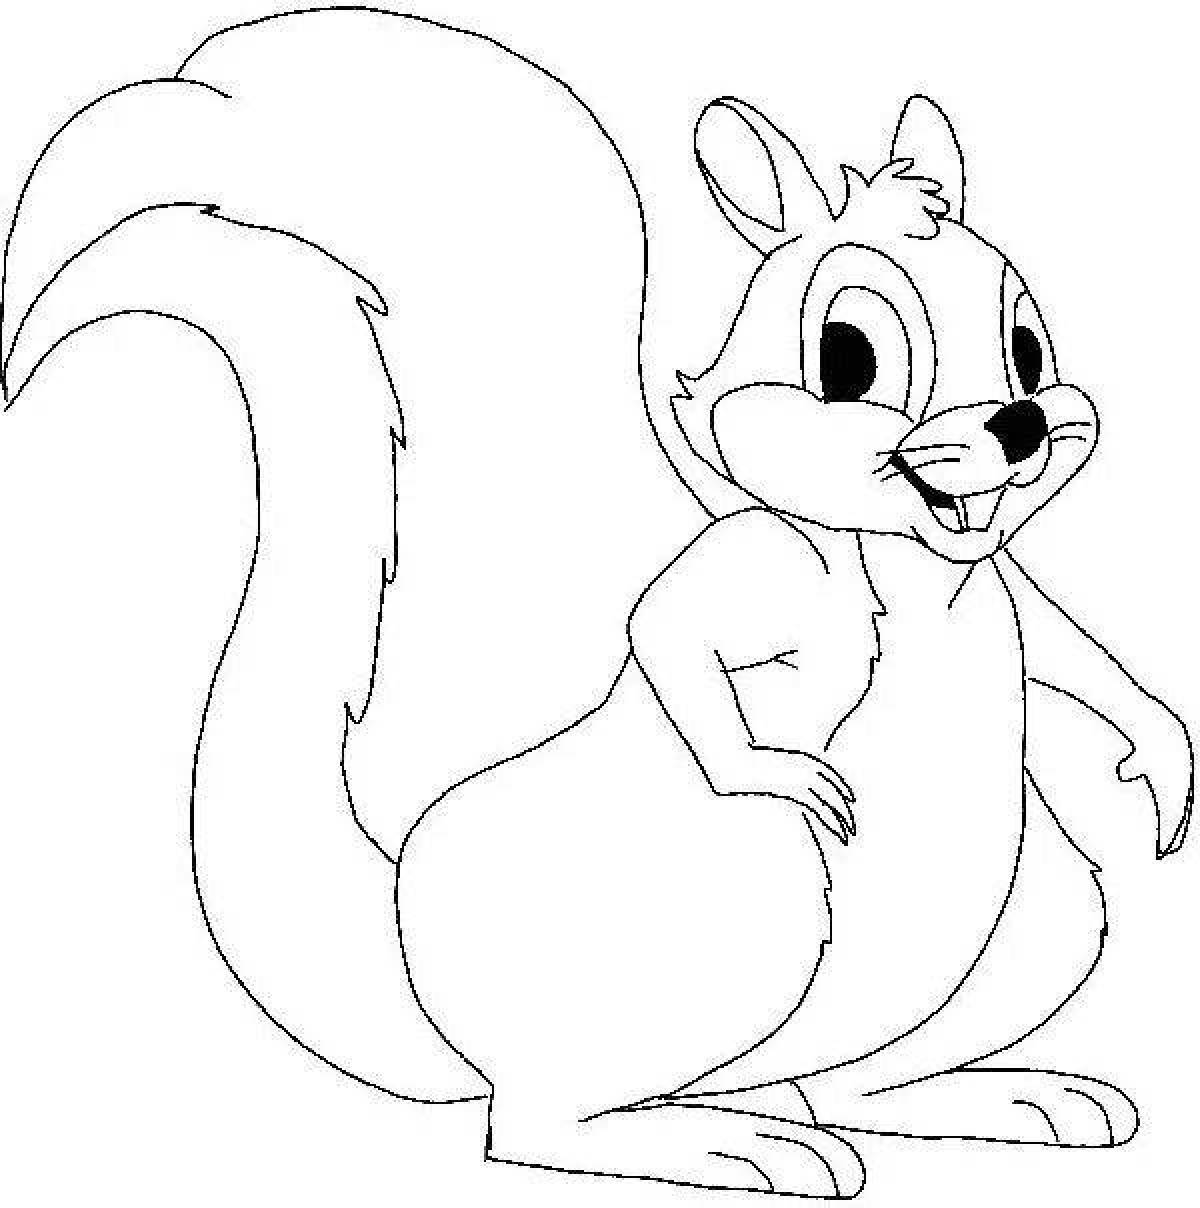 Coloring book playful squirrel